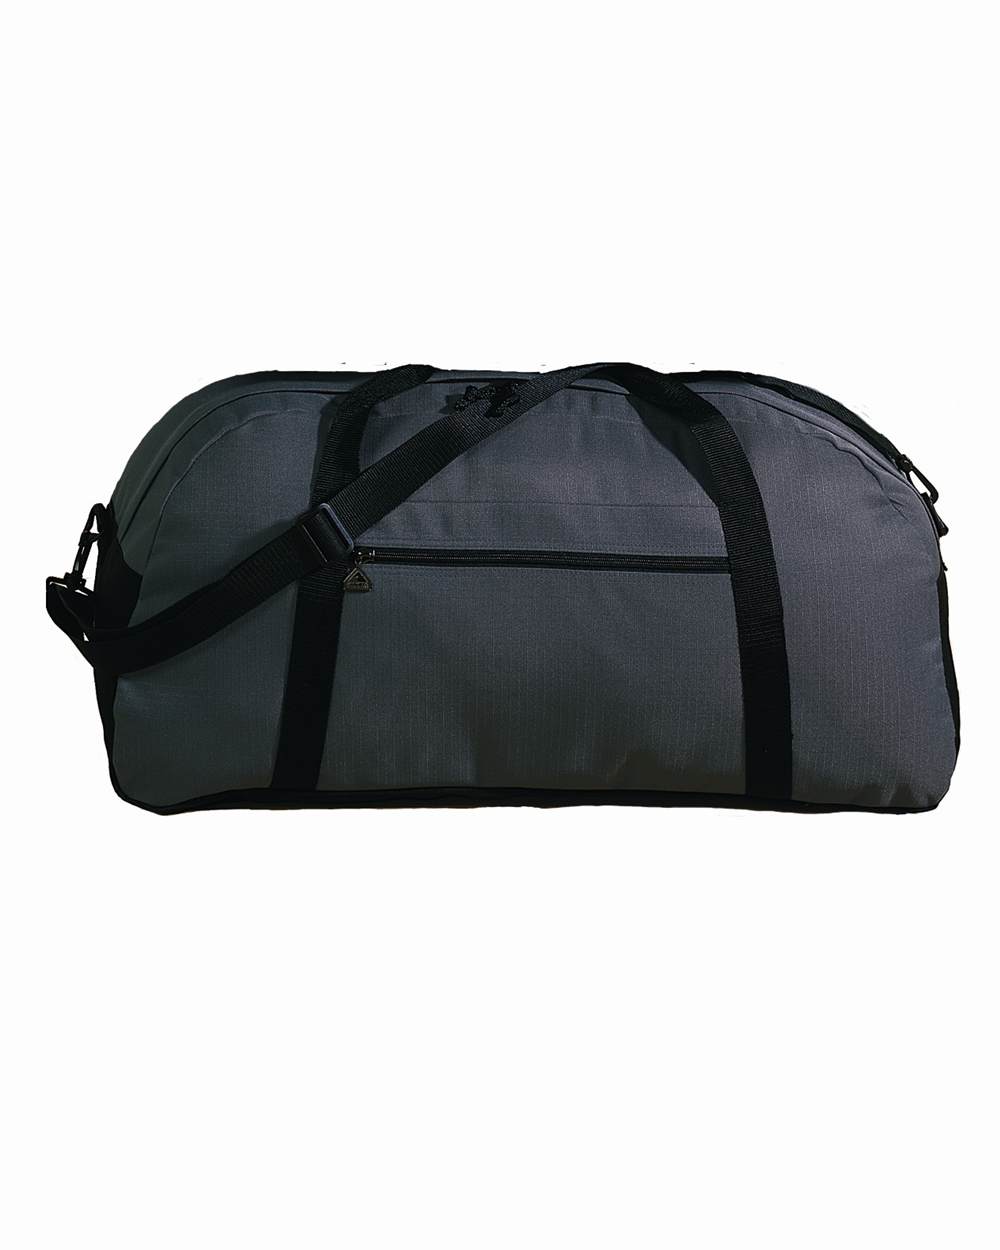 Augusta 1703A Large Ripstop Duffel Bag - Graphite & Black- ALL - image 4 of 5